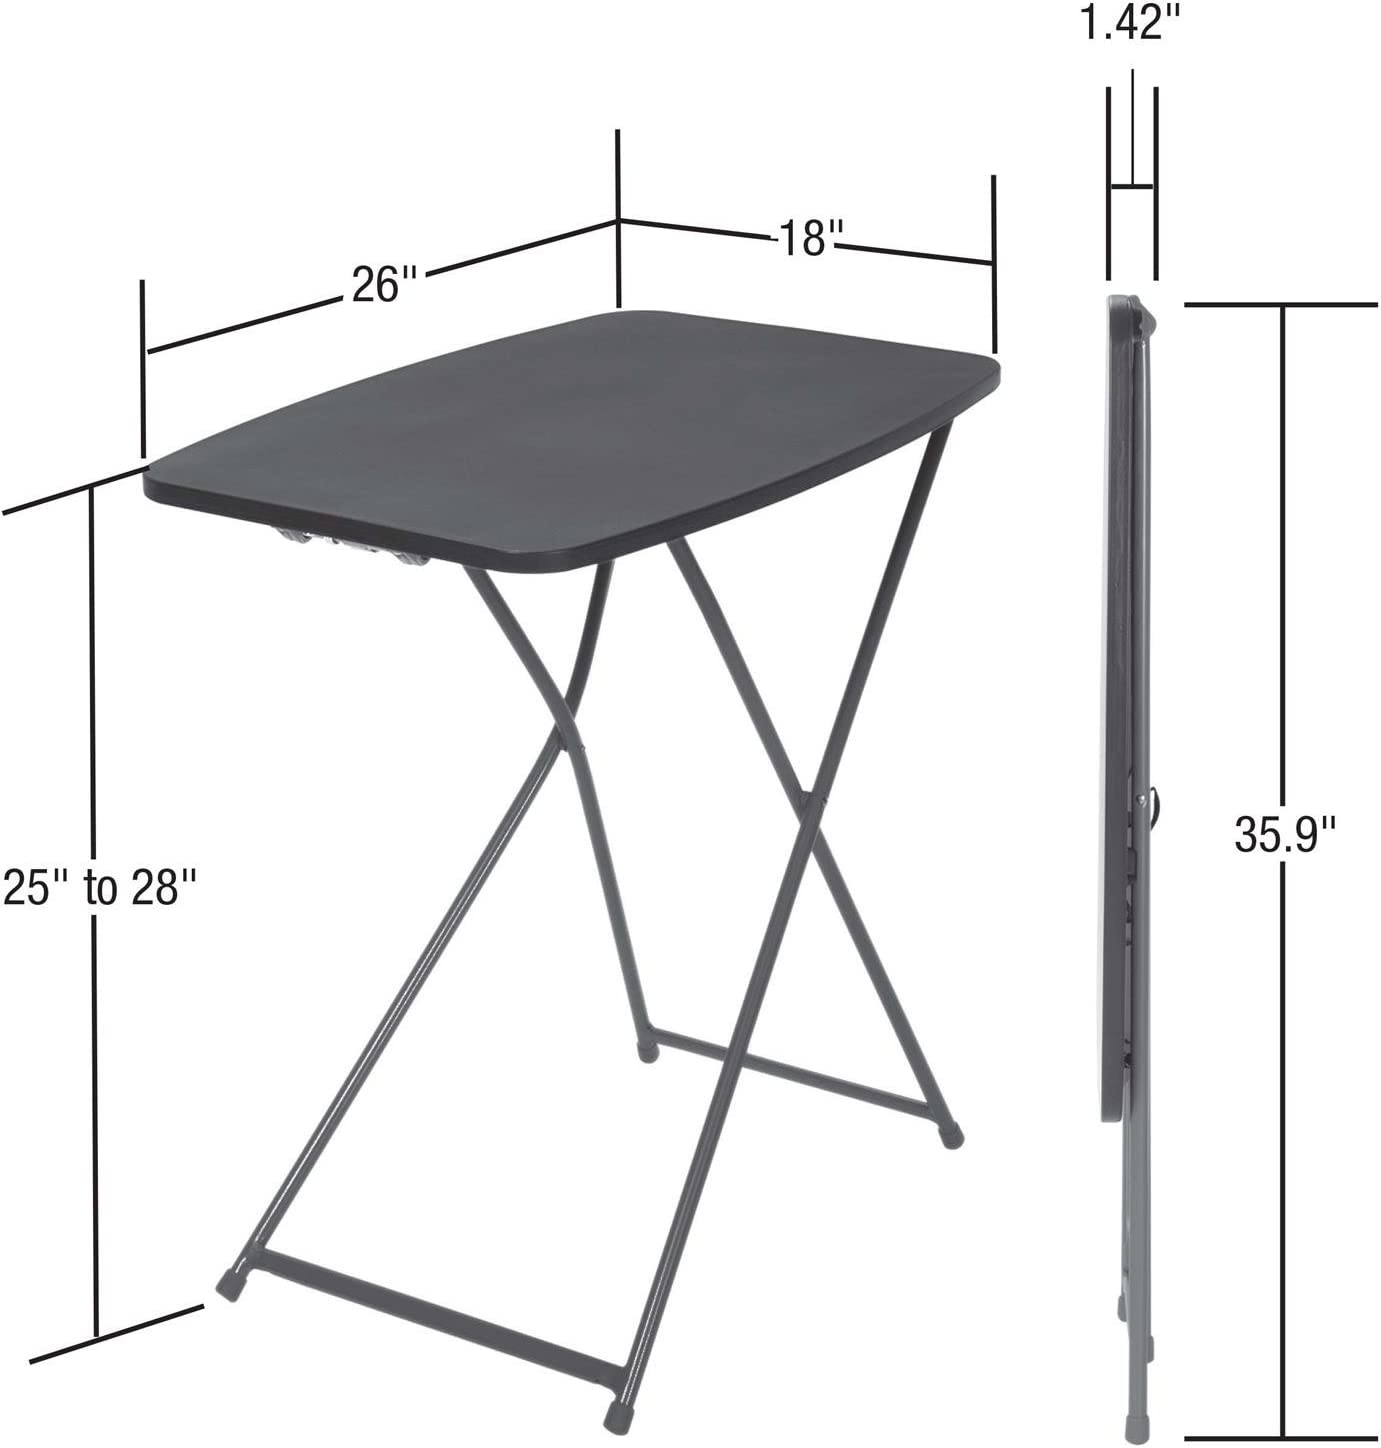 COSCO Multi-Purpose, Adjustable Height Personal Folding Activity Table, 1 Pack, Black